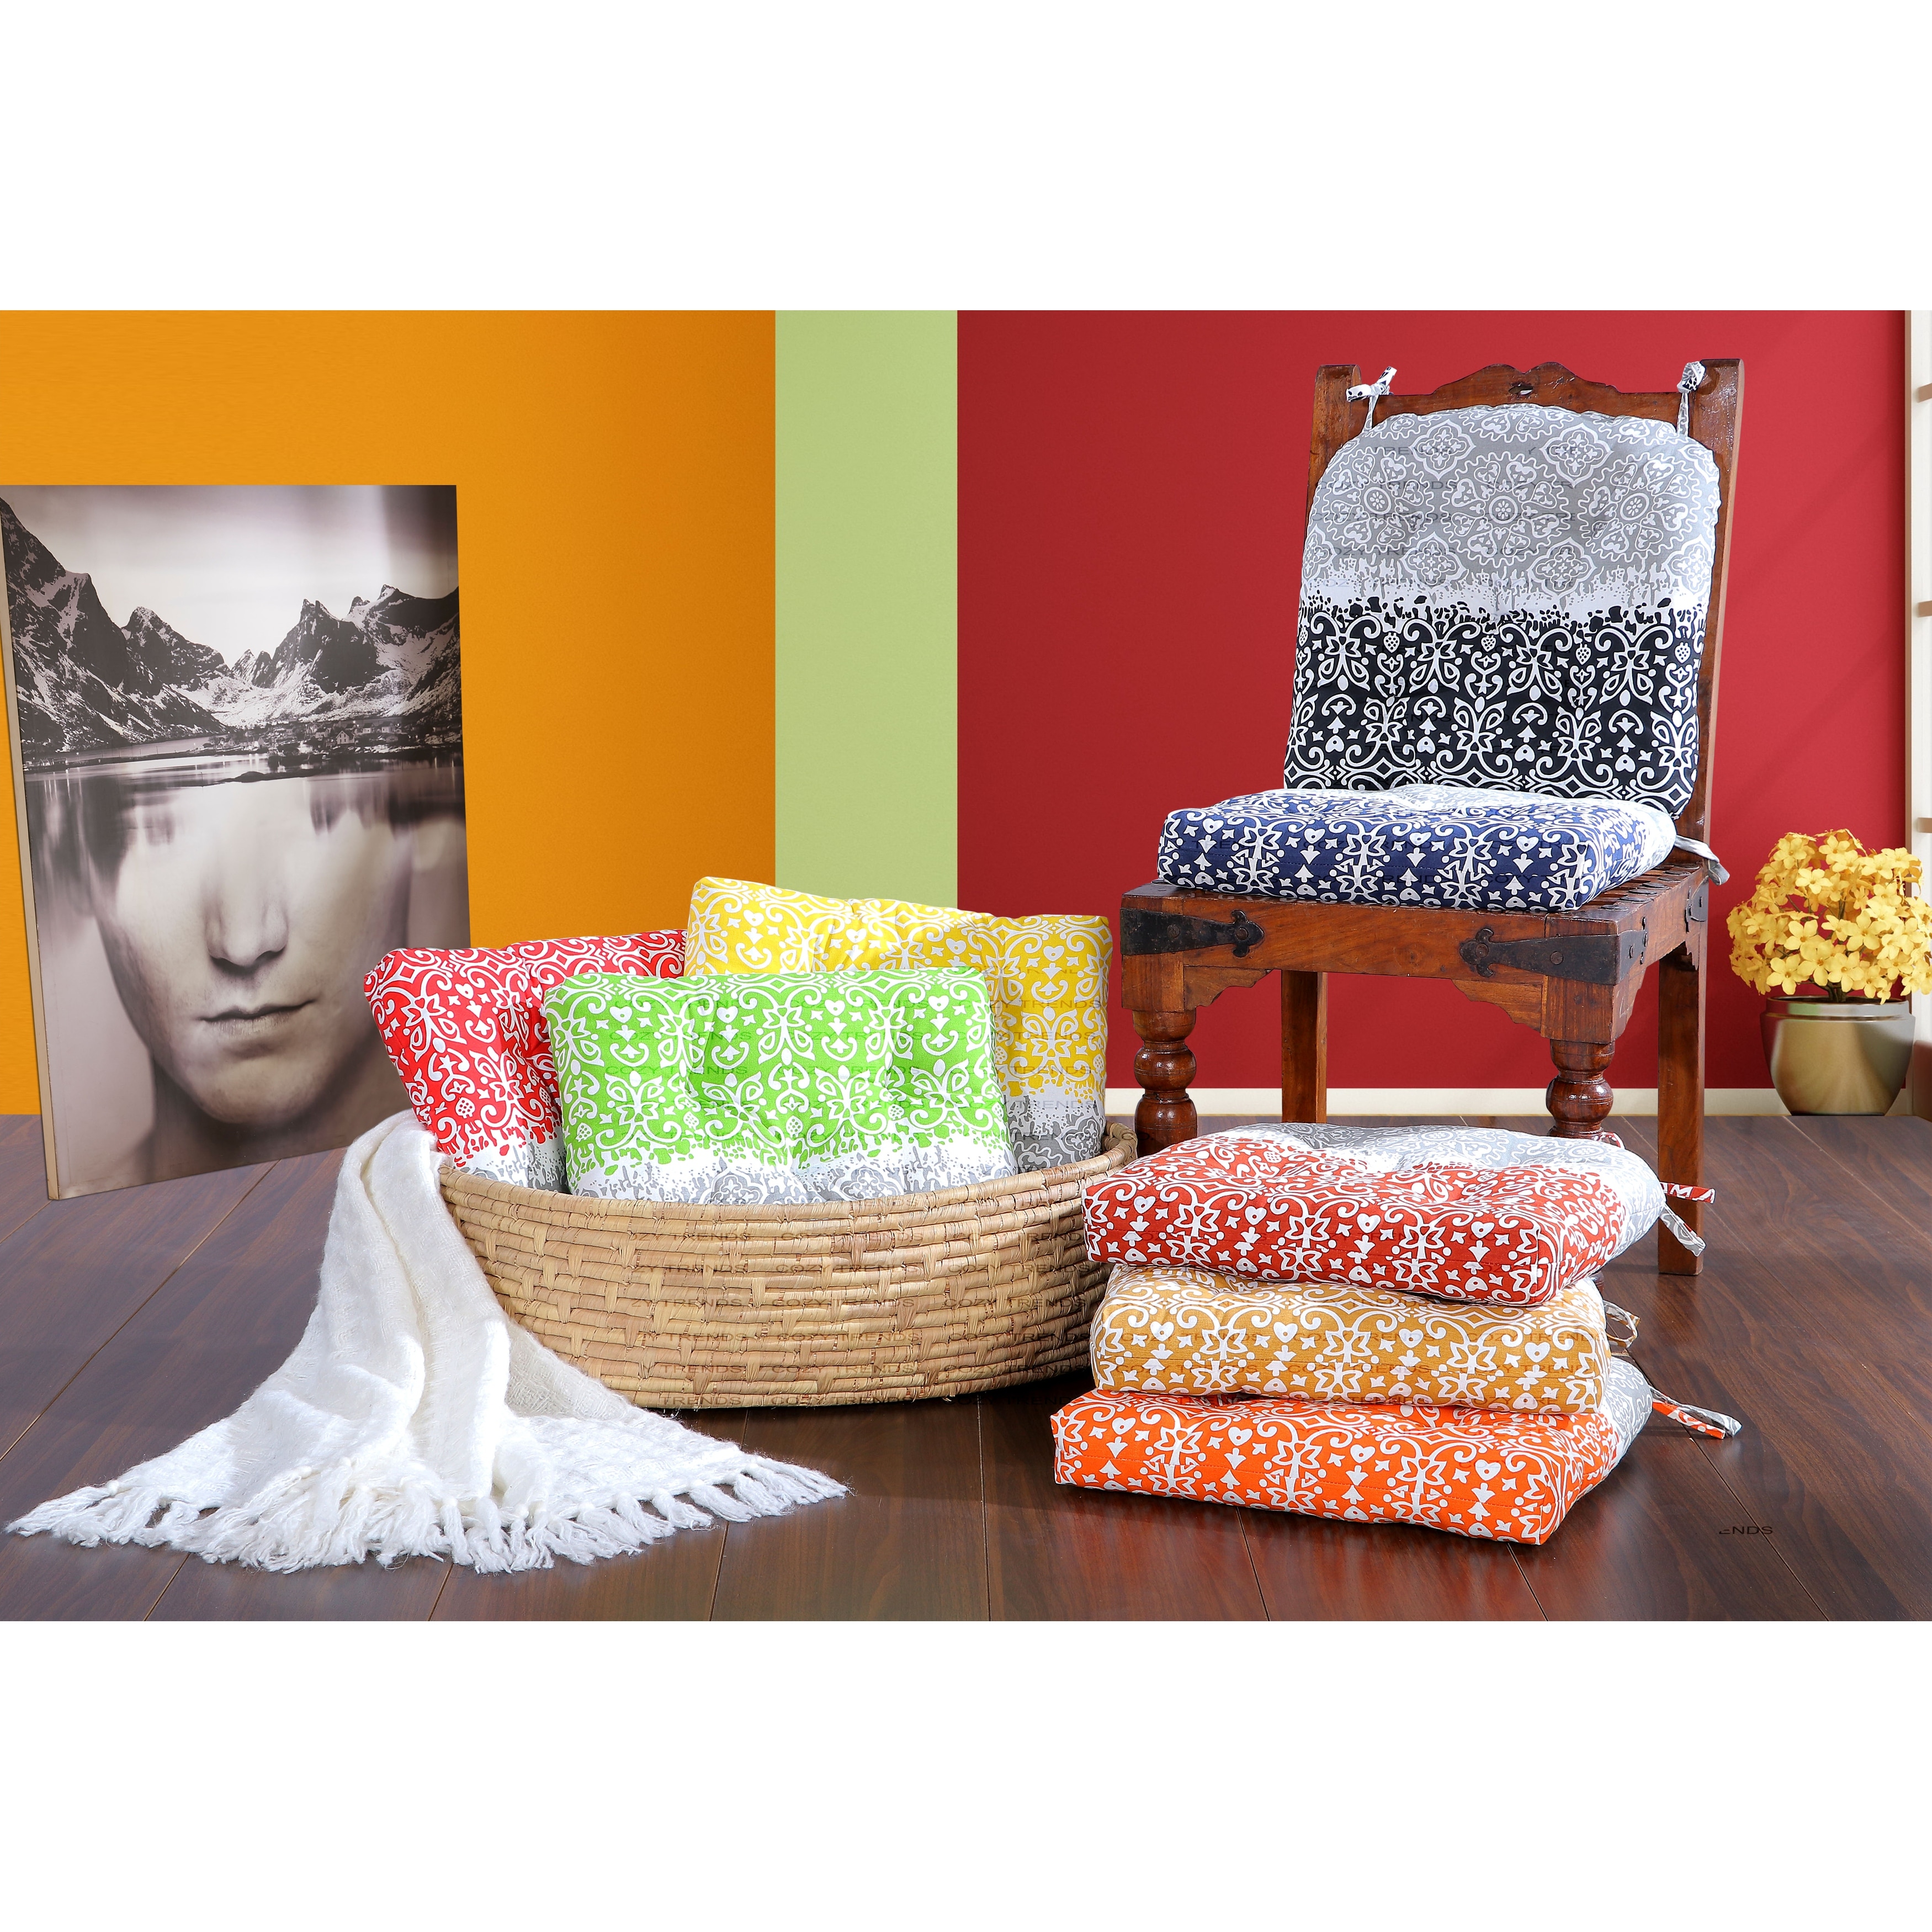 https://ak1.ostkcdn.com/images/products/is/images/direct/afe8c57920d1b2e2c256065857b28967af310187/Cotton---Comfortable-Chair-Pad-with-Ties-%2CThick-Cotton-Filling%2C-for-Dining-Office%2C-Kitchen%2C-Living-Room-16%E2%80%9Dx16%27%27-%28Set-of-2%29.jpg